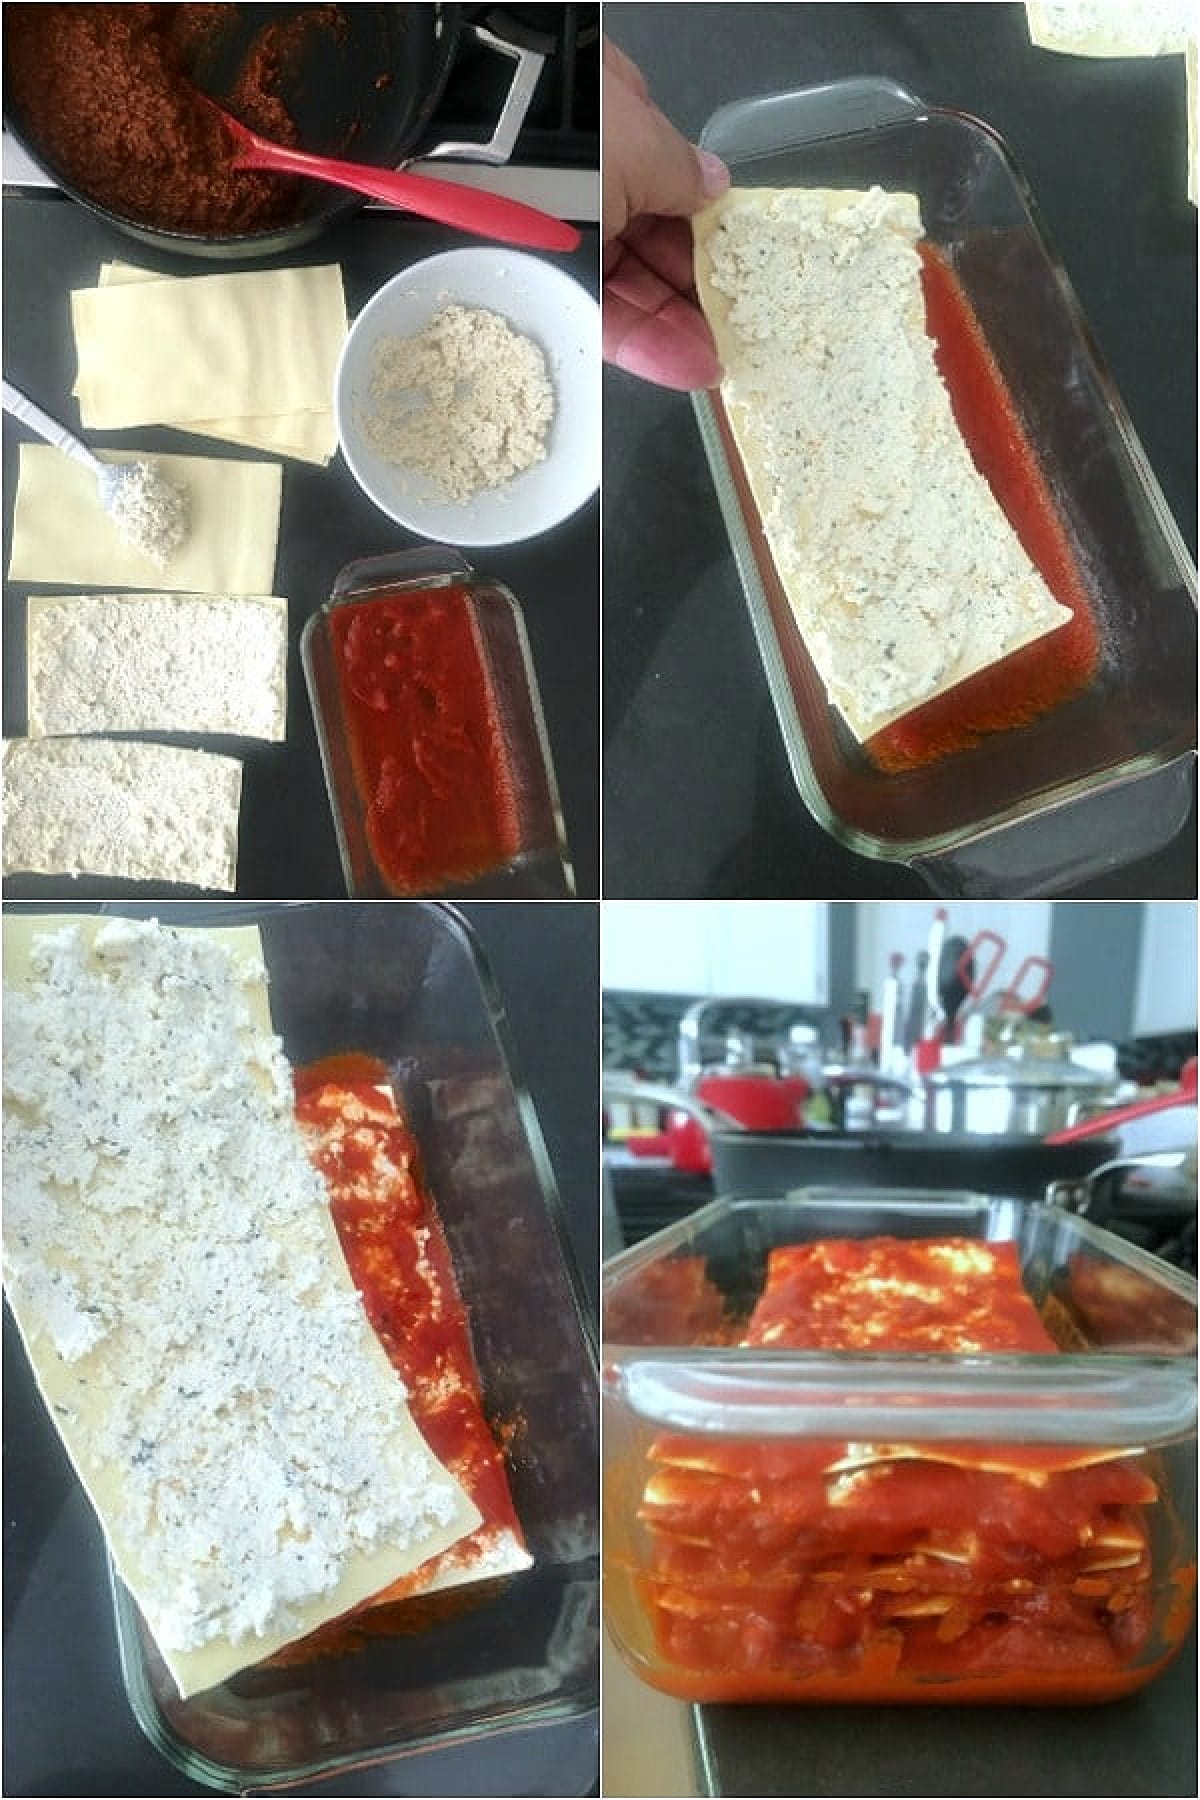 A four photo collage showing step by step assembly to make lasagna: spread vegan ricotta cheese over noodles, layer them in baking dish with sauce and vegan meat sauce.